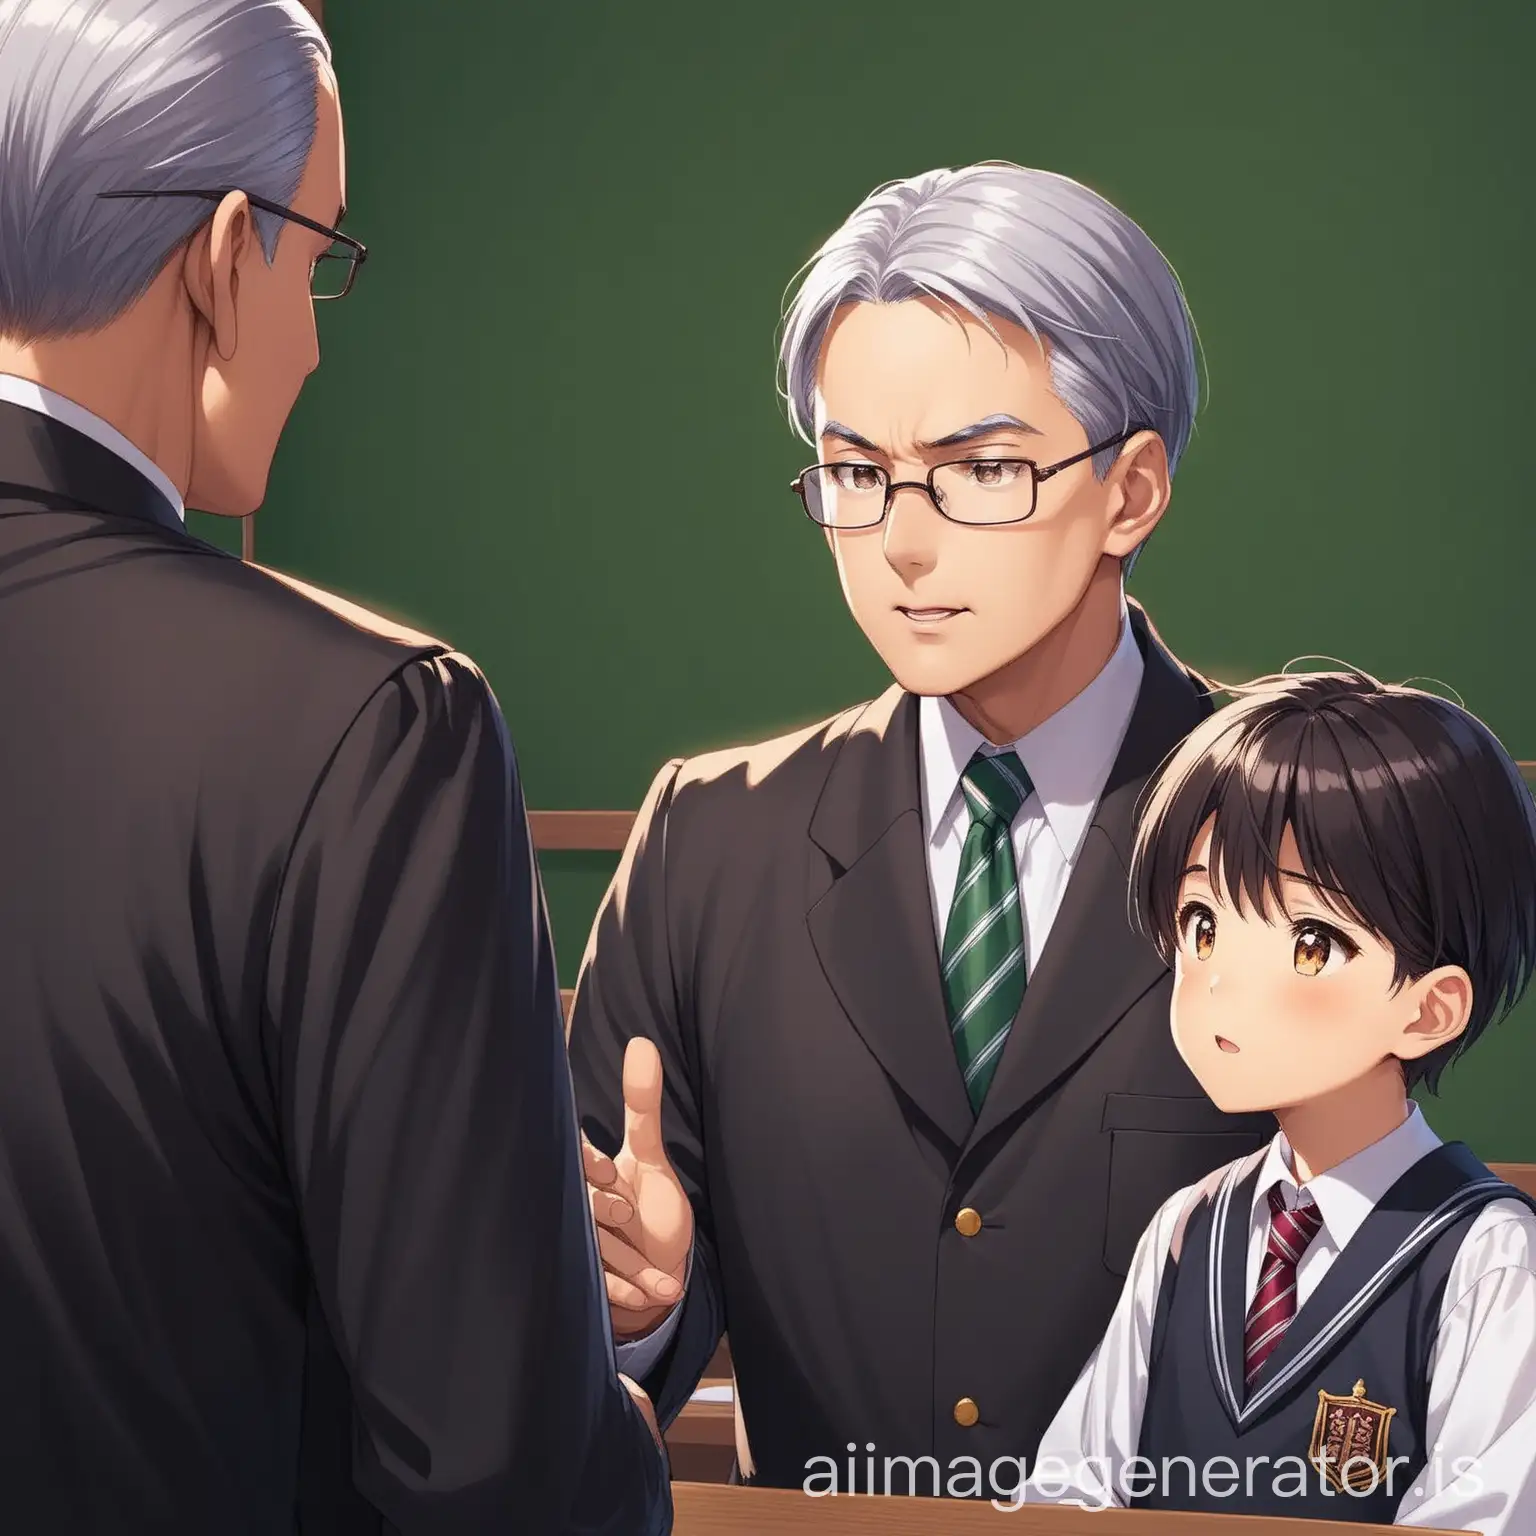 headmaster is asking some question to a boy